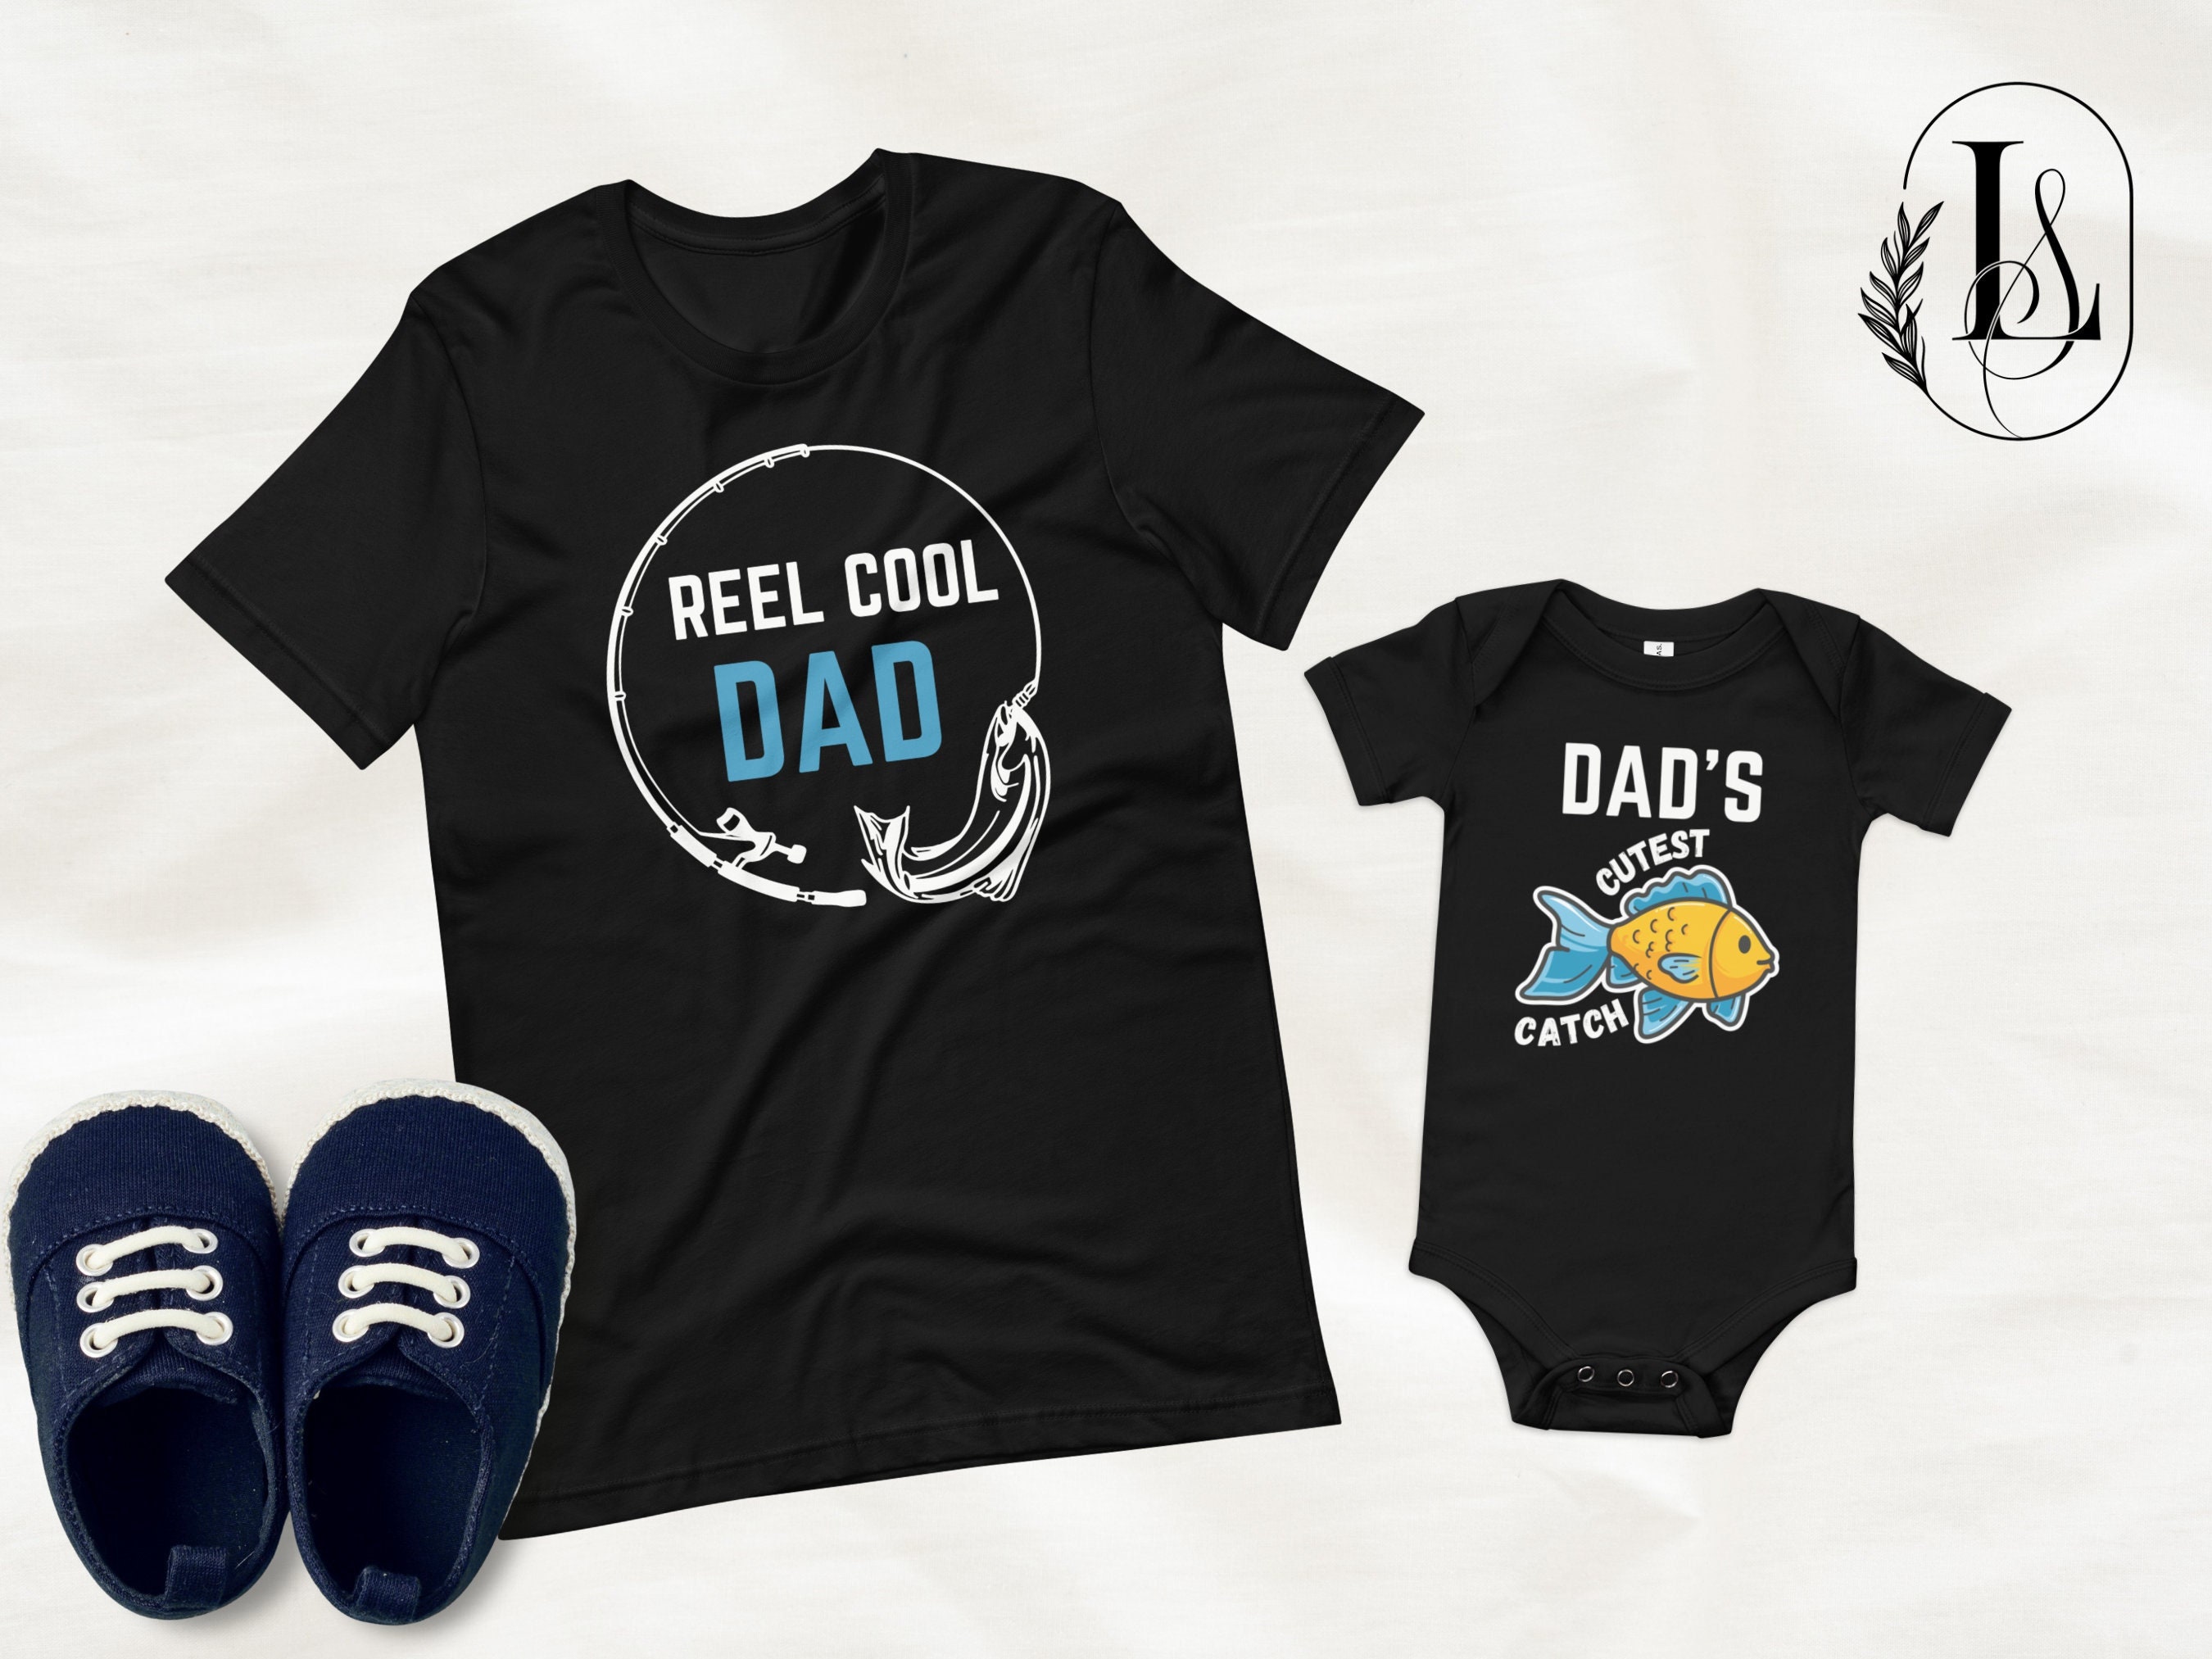 Dad and Baby Matching Shirts, Fishing Father Son Matching Shirts, Fathers  Day Gift From Son, Fathers Day Baby Gift, Dad and Me Shirts Gift -   Canada